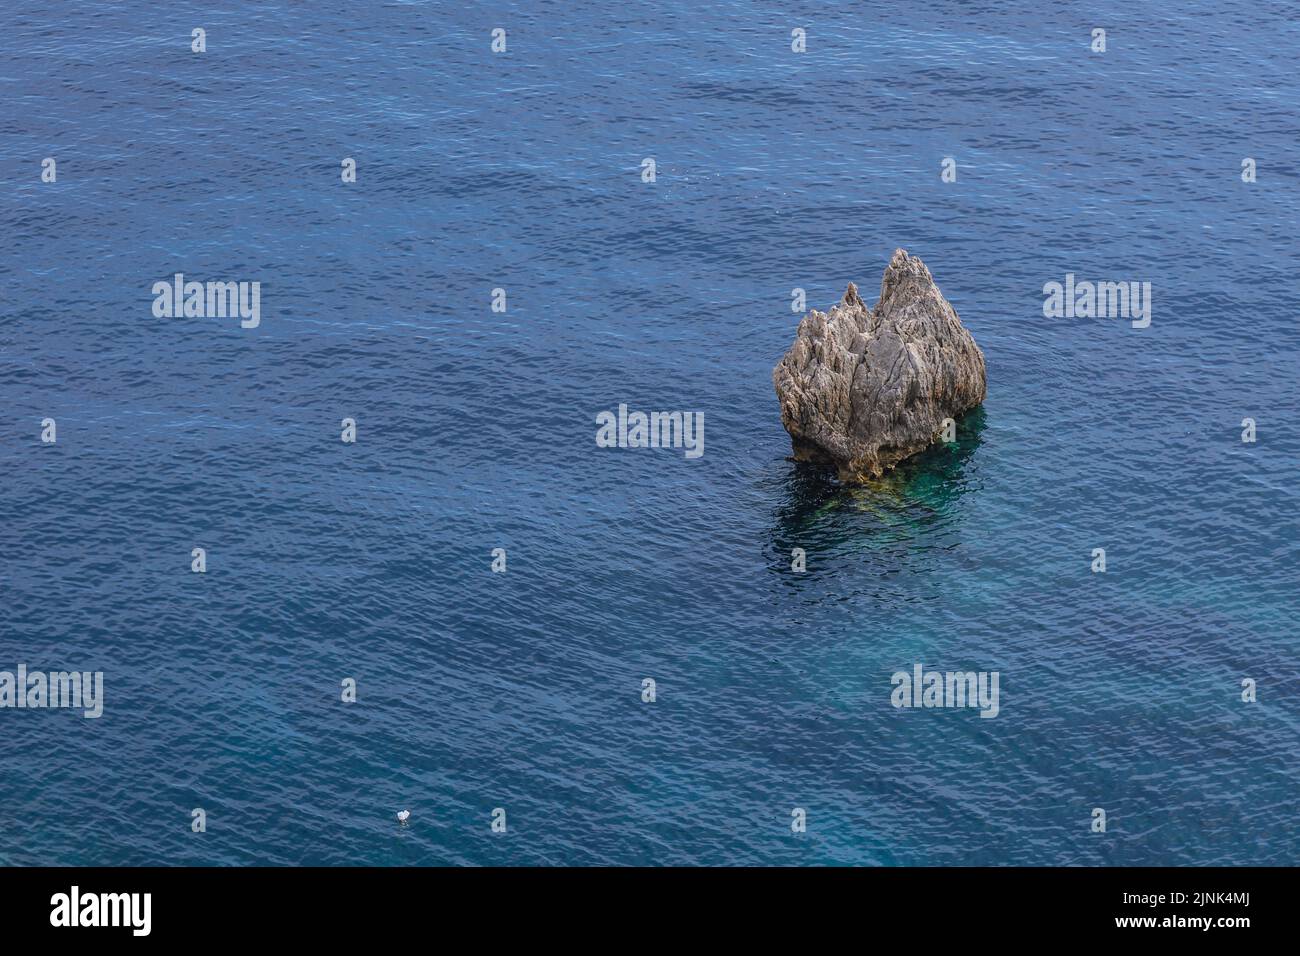 Rocky outcrop seen from shore in Palaiokastritsa famous resort town on Greek Island of Corfu Stock Photo